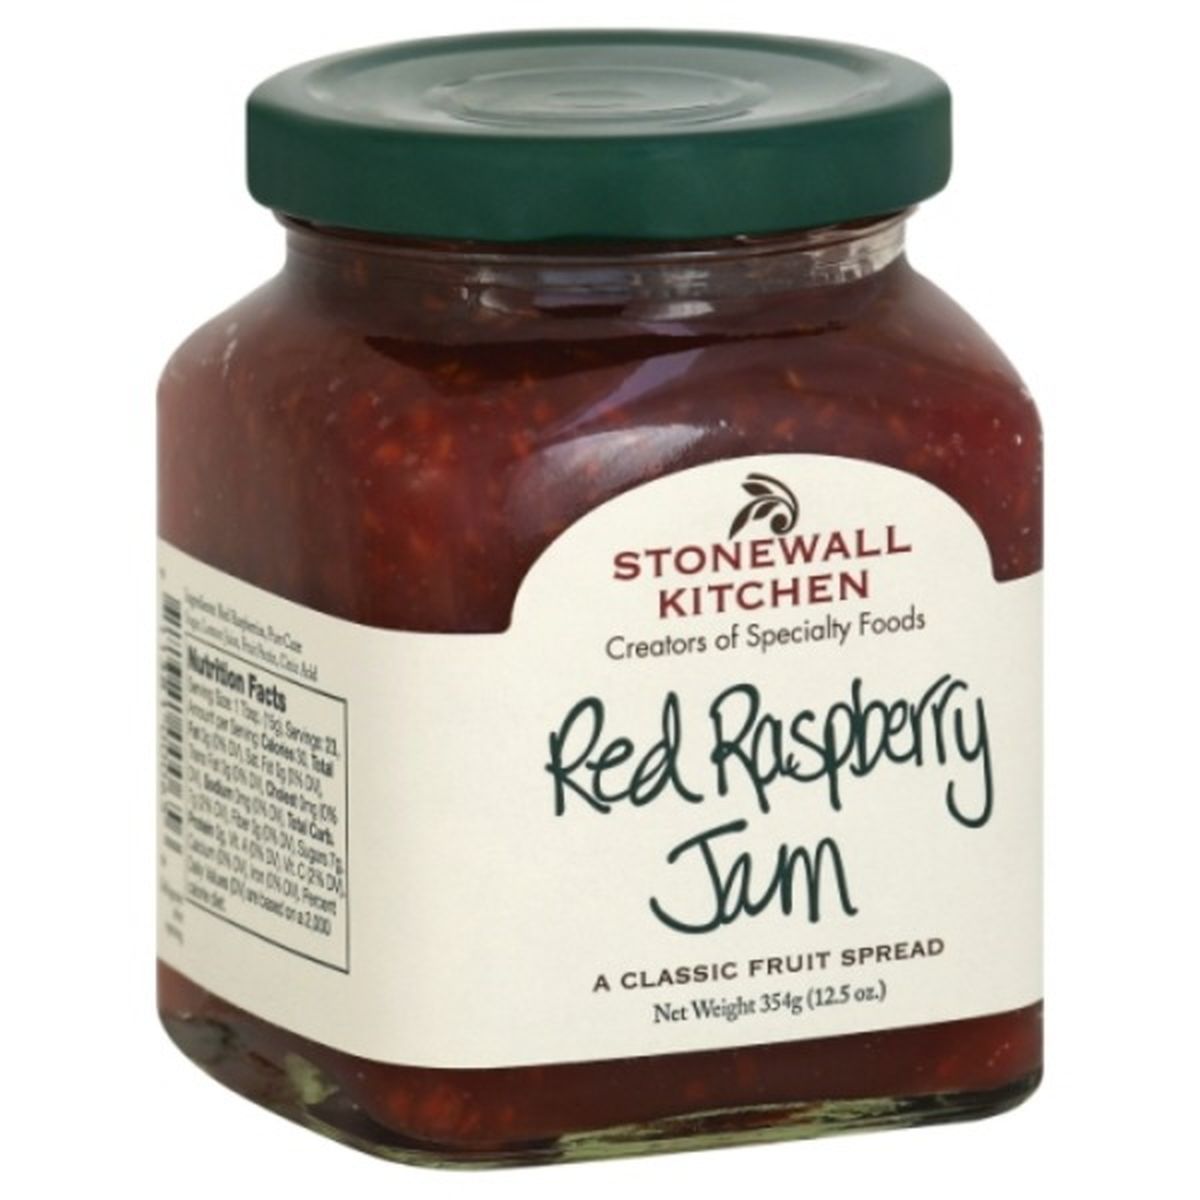 Calories in Stonewall Kitchen Jam, Red Raspberry